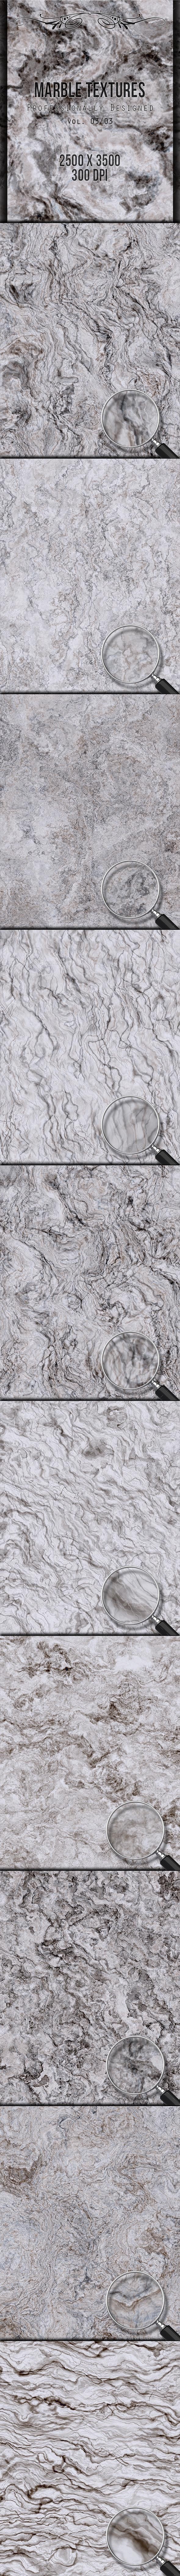 Marble textures 03 preview